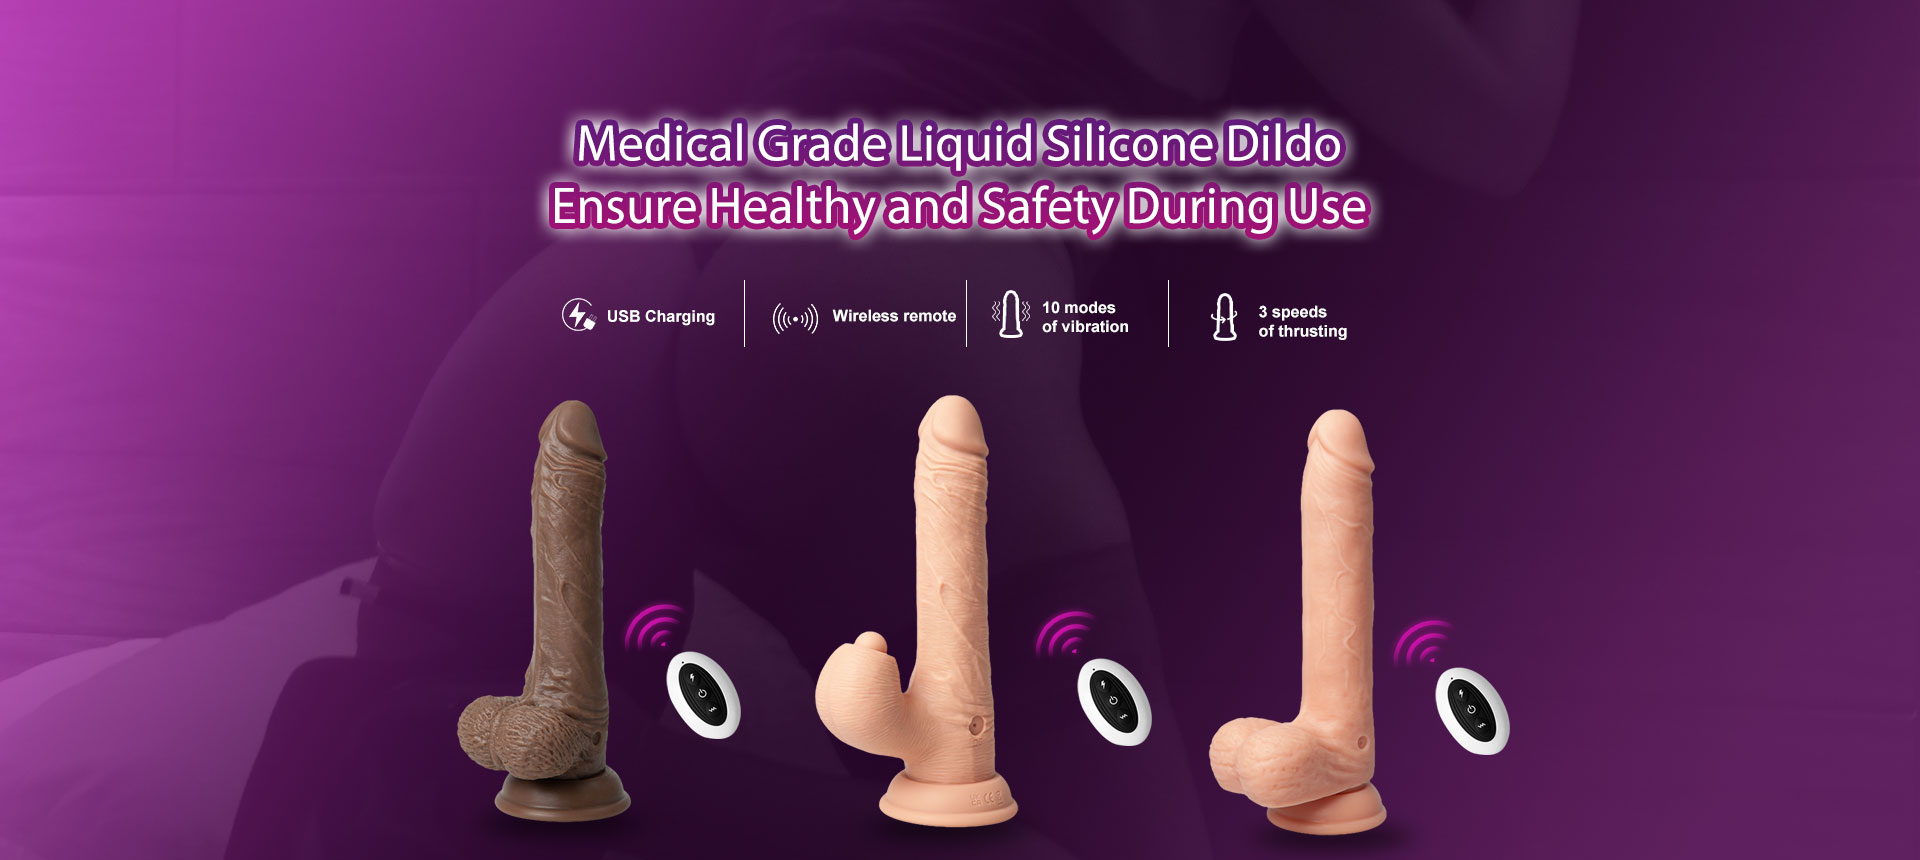 Silicone Dildo Manufacturers and Suppliers